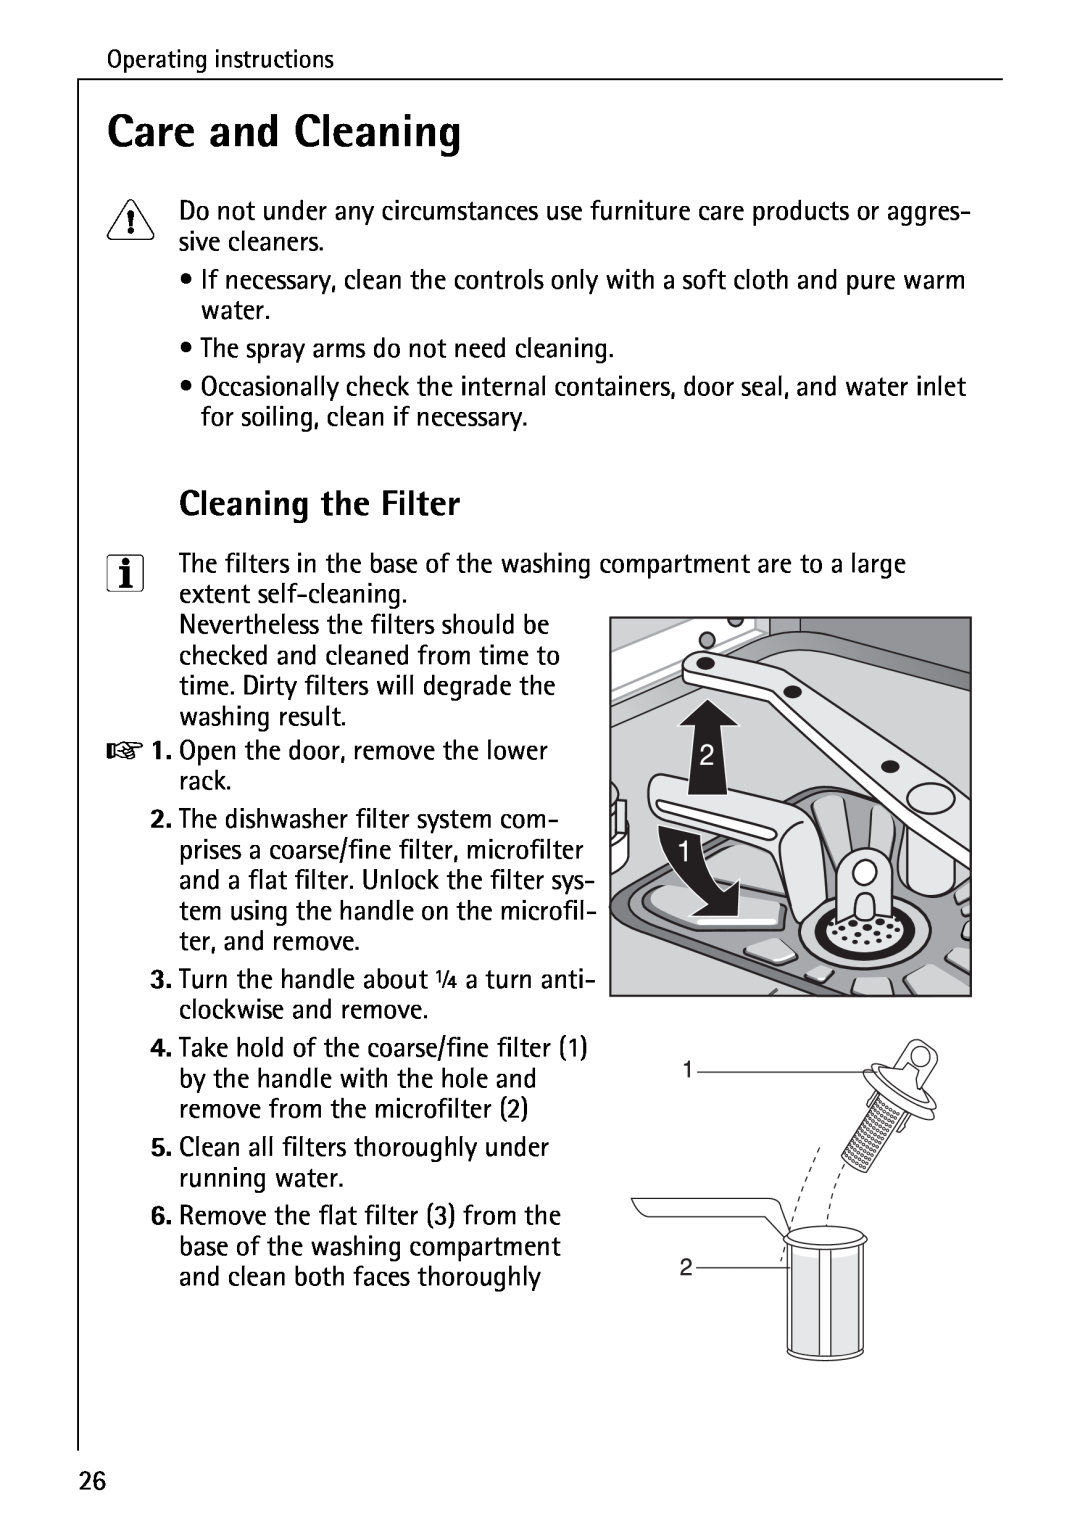 AEG 6281 I manual Care and Cleaning, Cleaning the Filter 